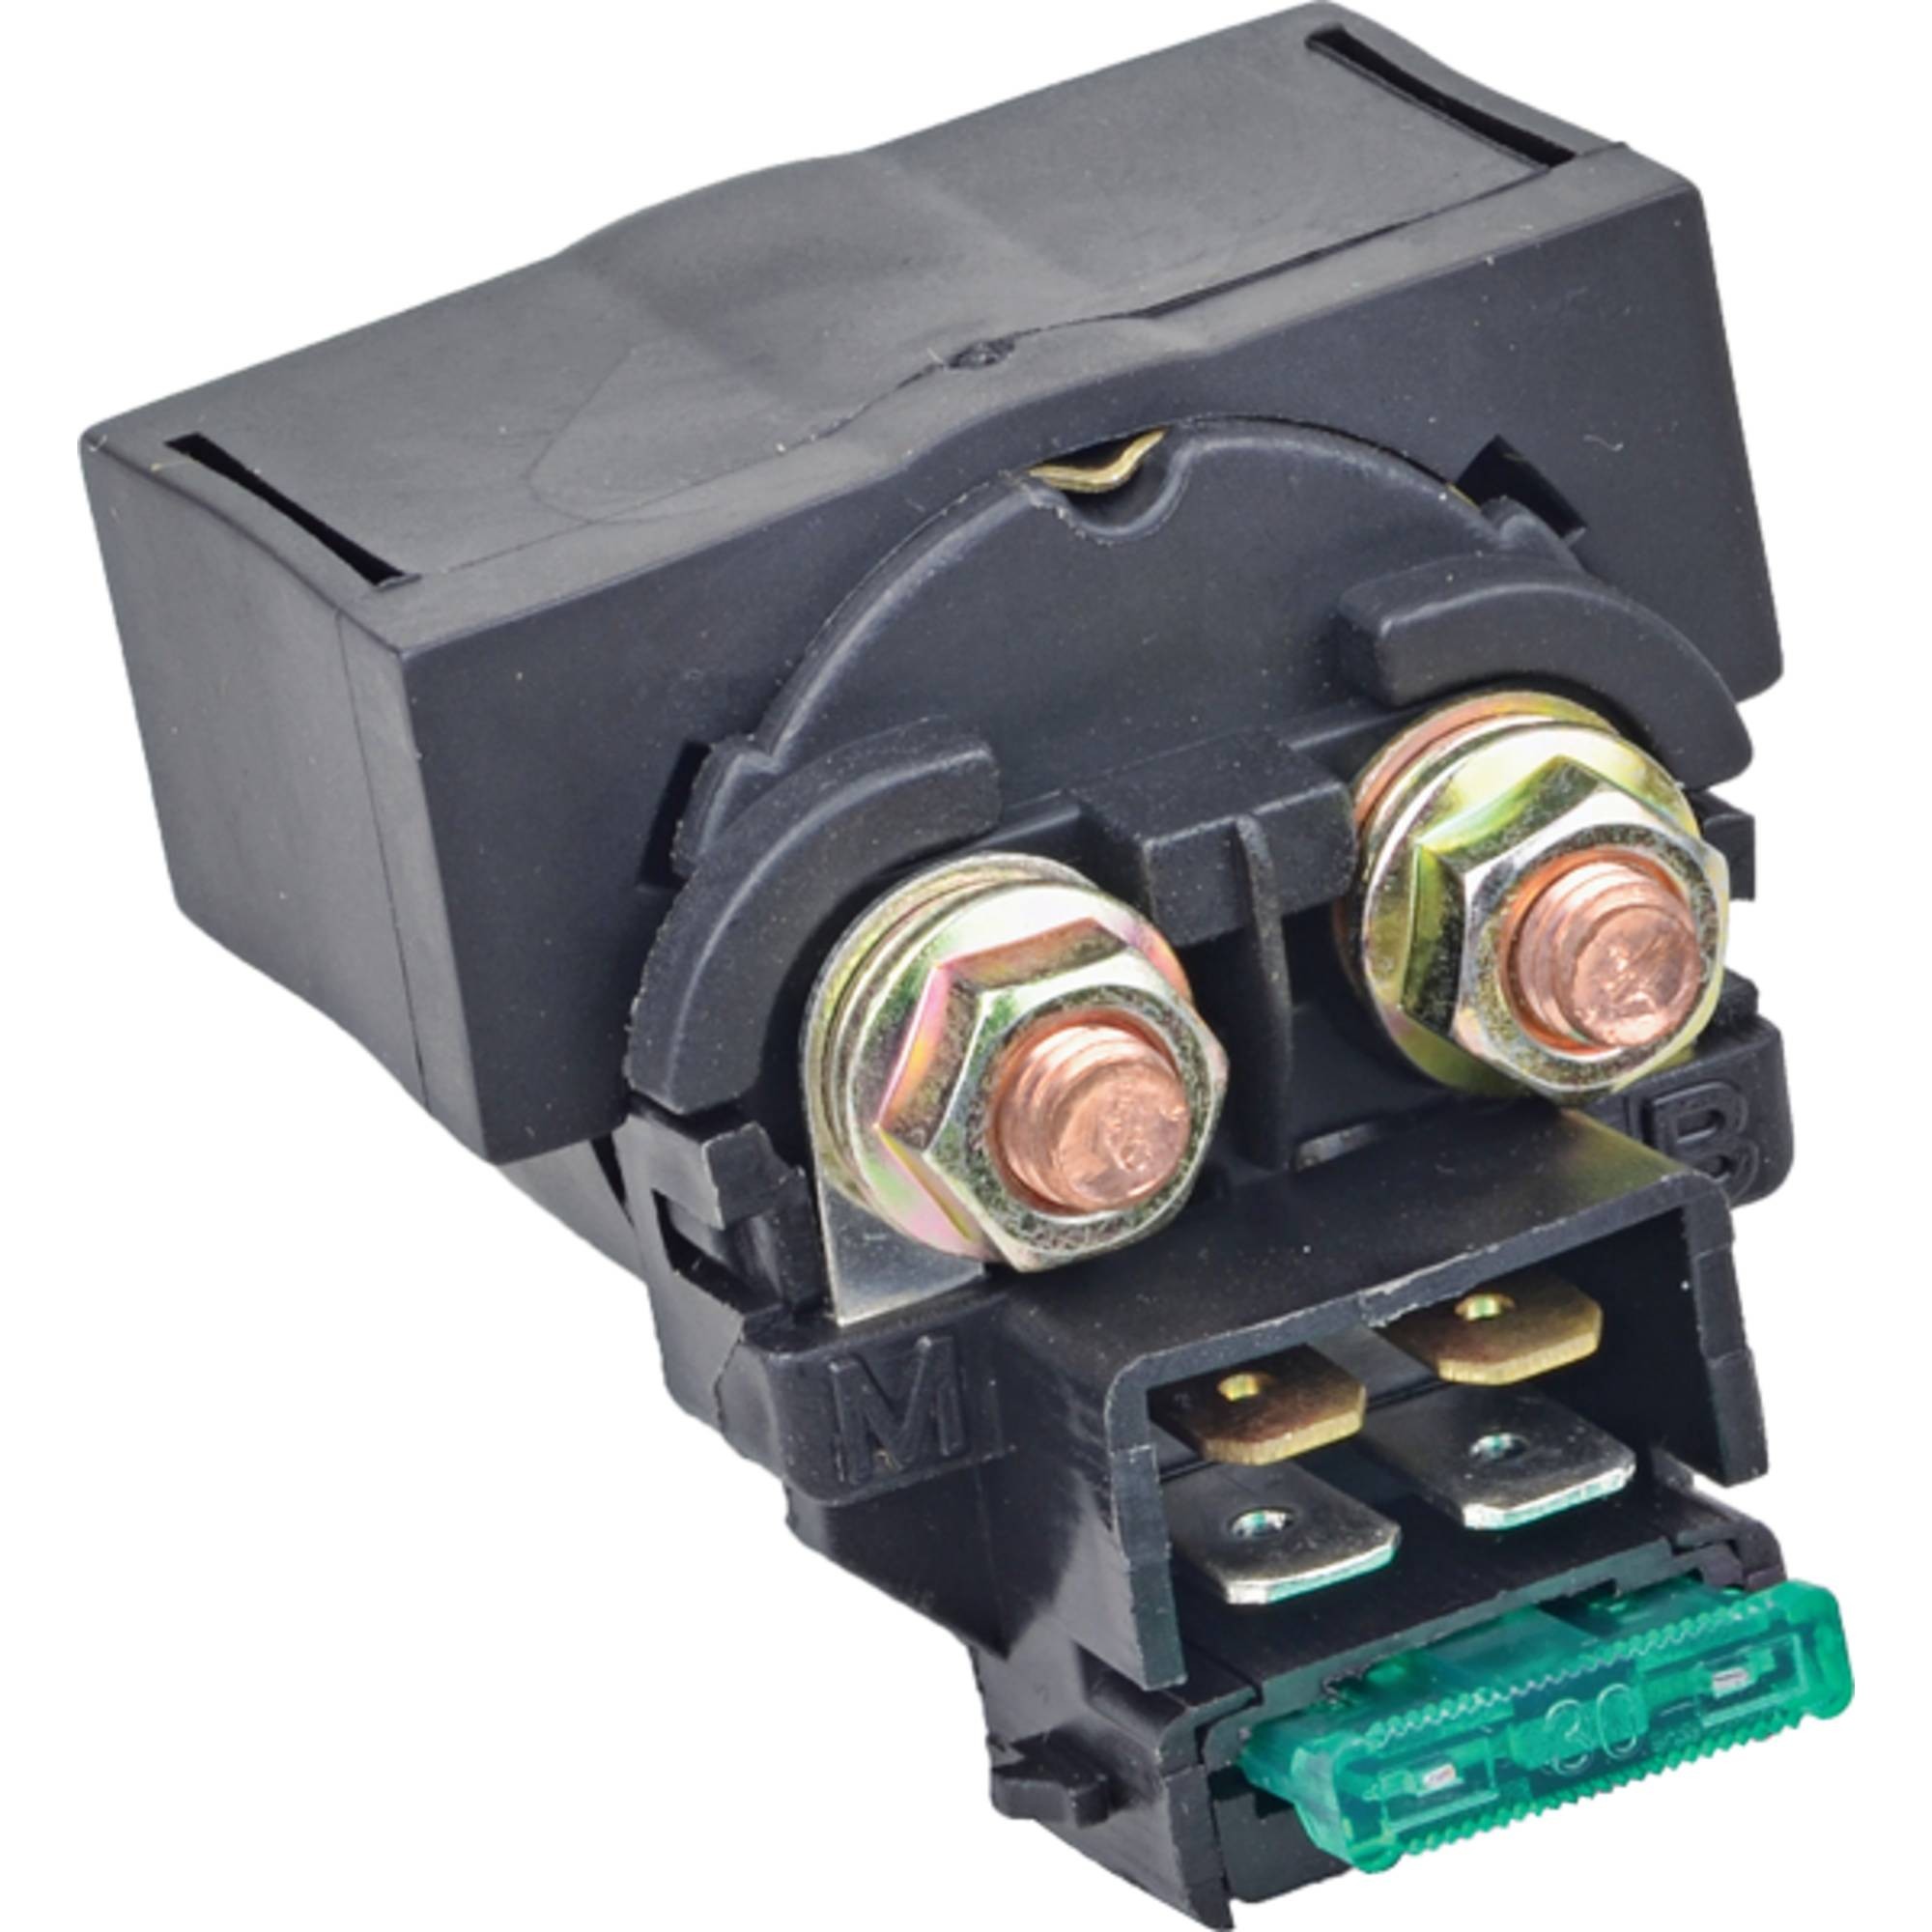 Replacement for Honda 35850-425-007 Solenoid - Switch